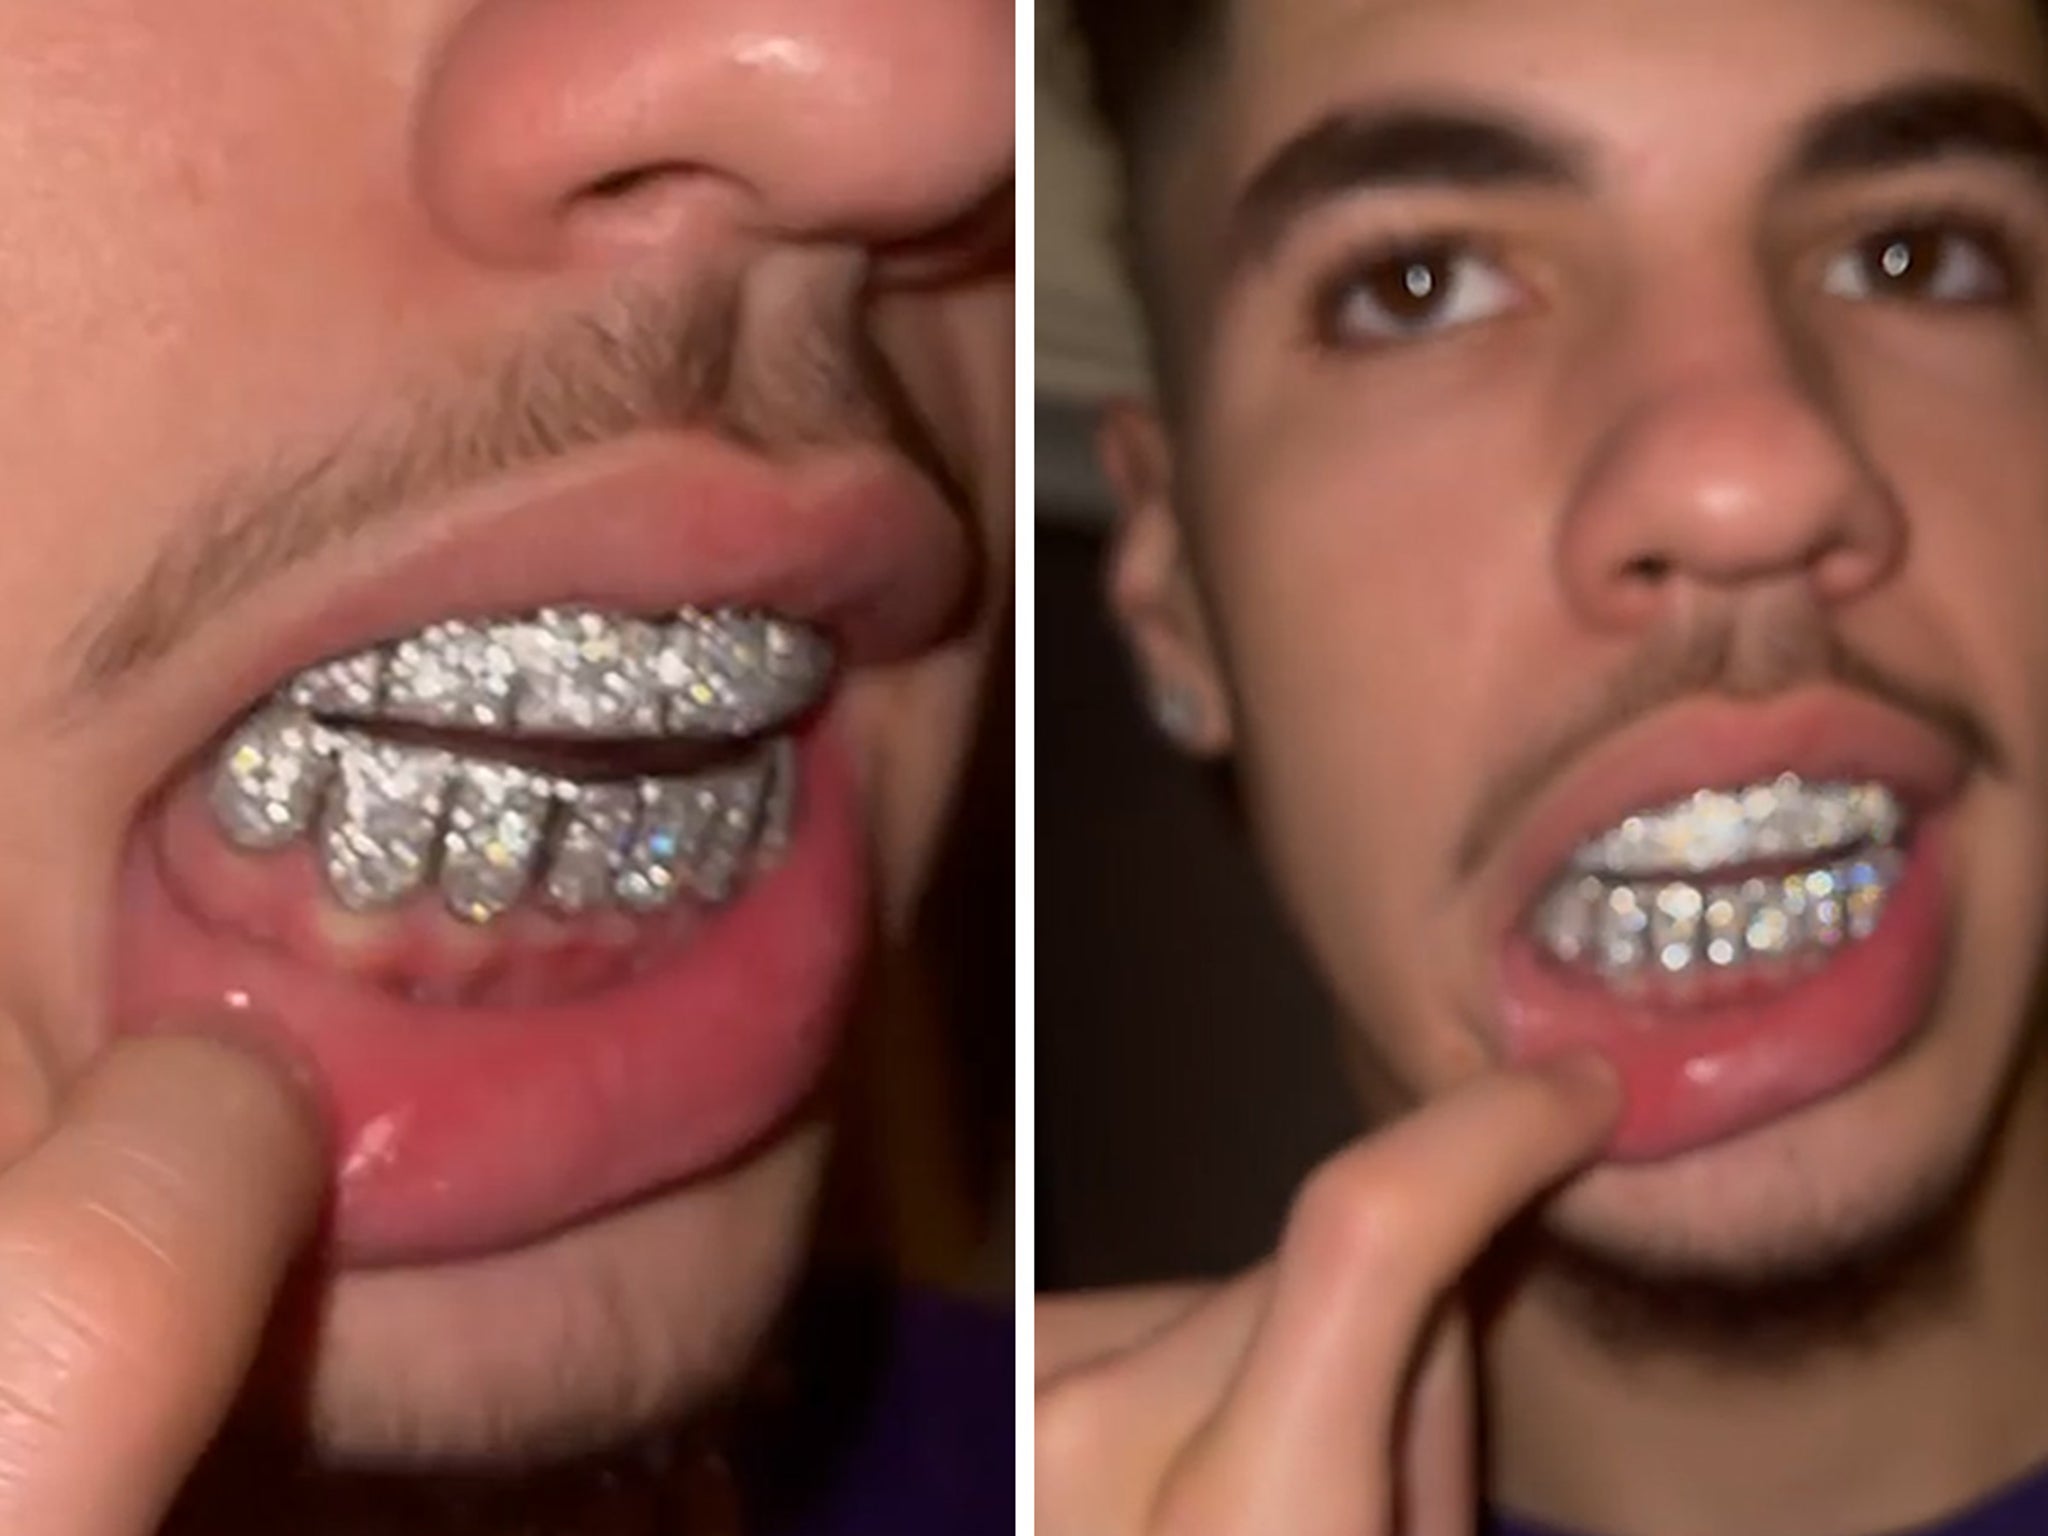 LaMelo Ball Cops Baller Diamond Grill With 14k Welcome To The NBA!